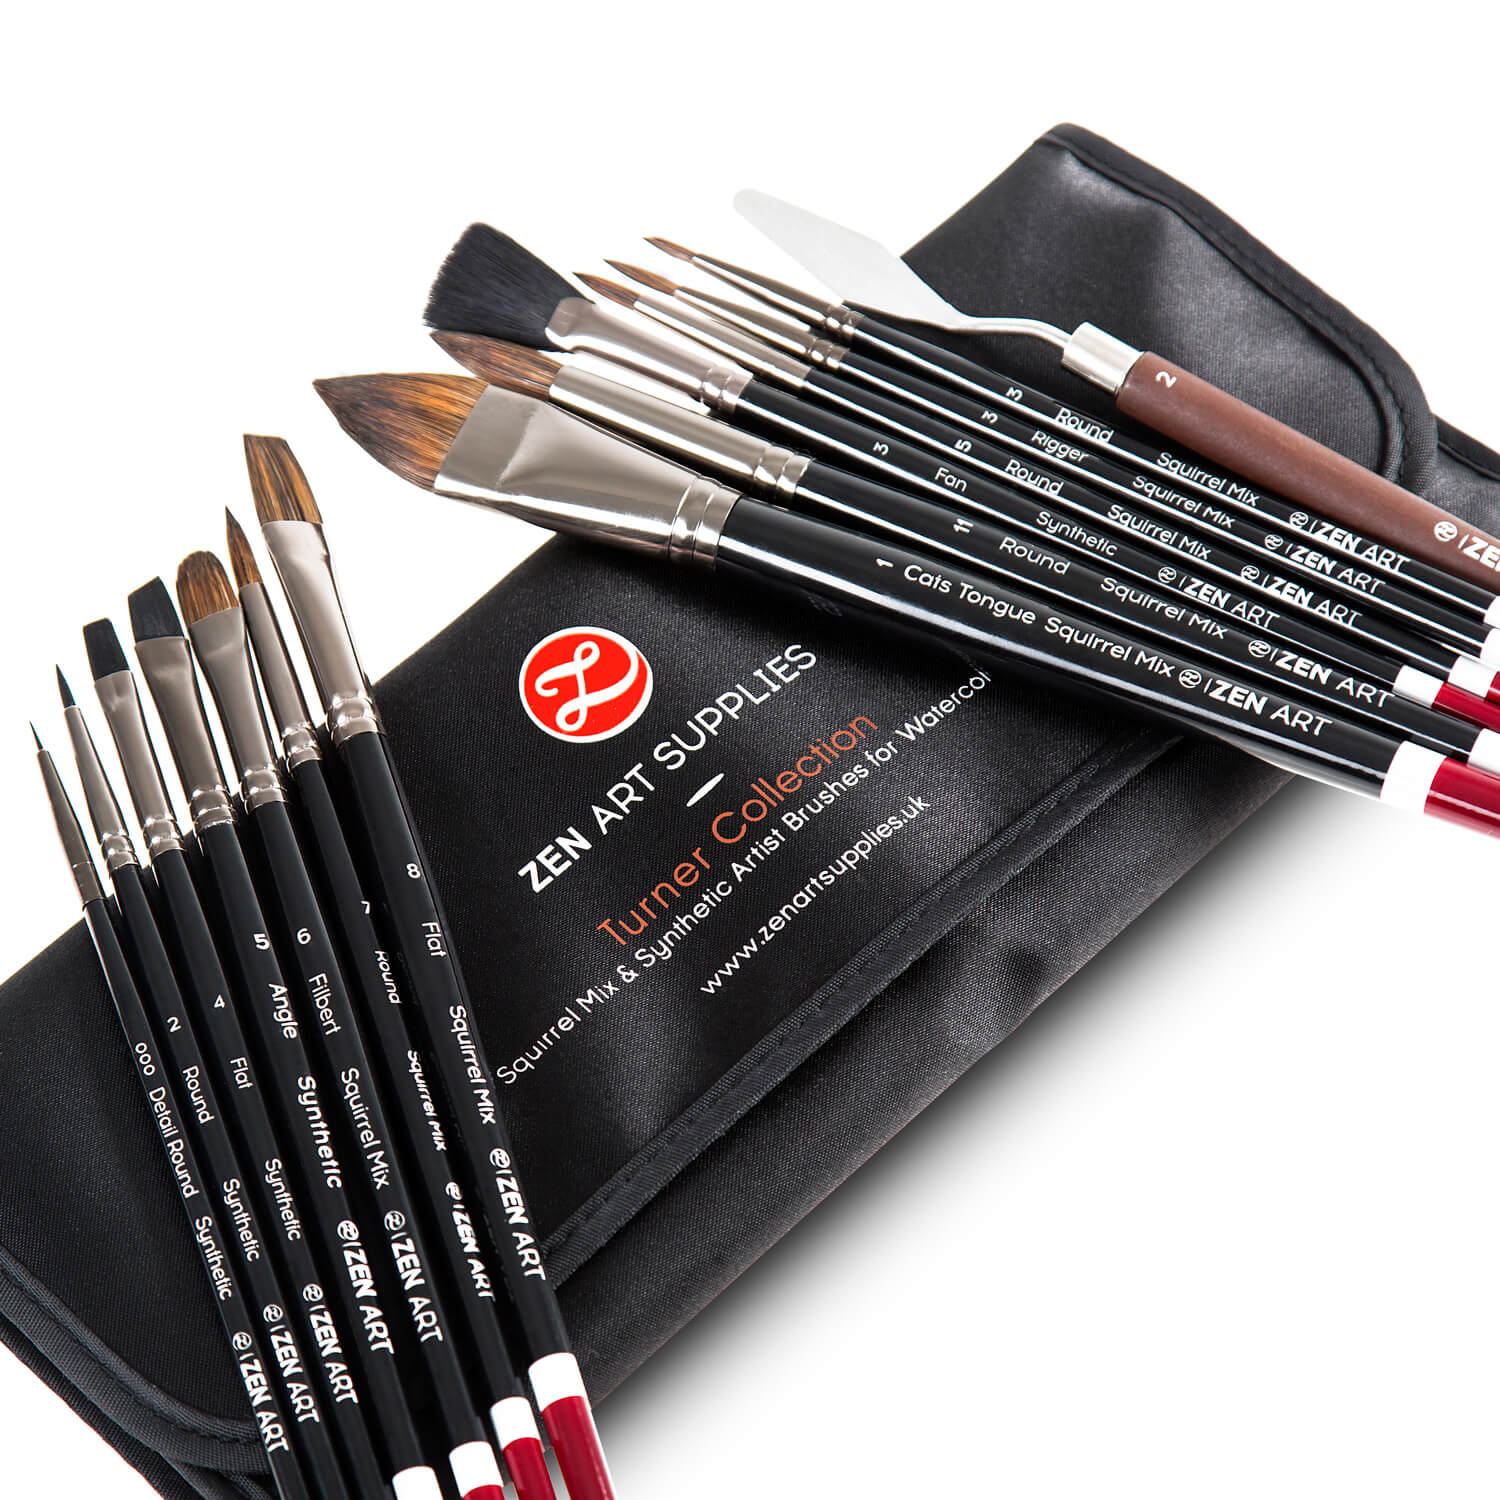 Real Techniques Easy as 123 Makeup Brush Kit, 4 Piece Set 